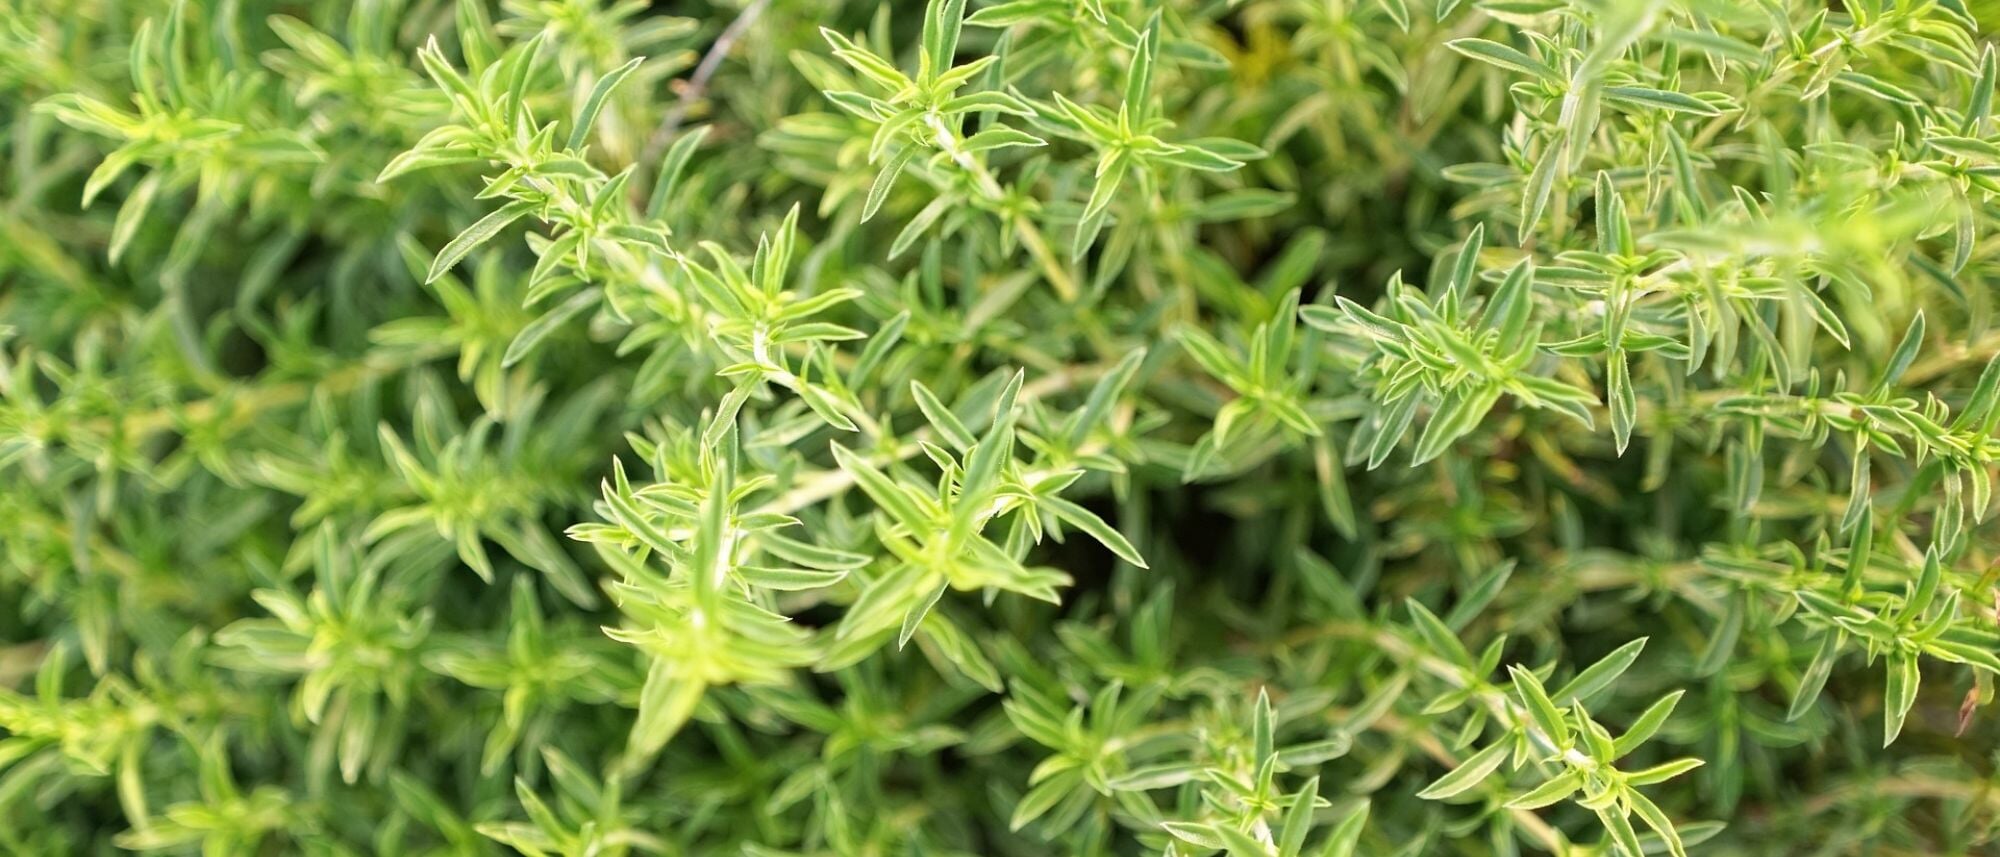 Grow aromatic and versatile summer savory in your garden